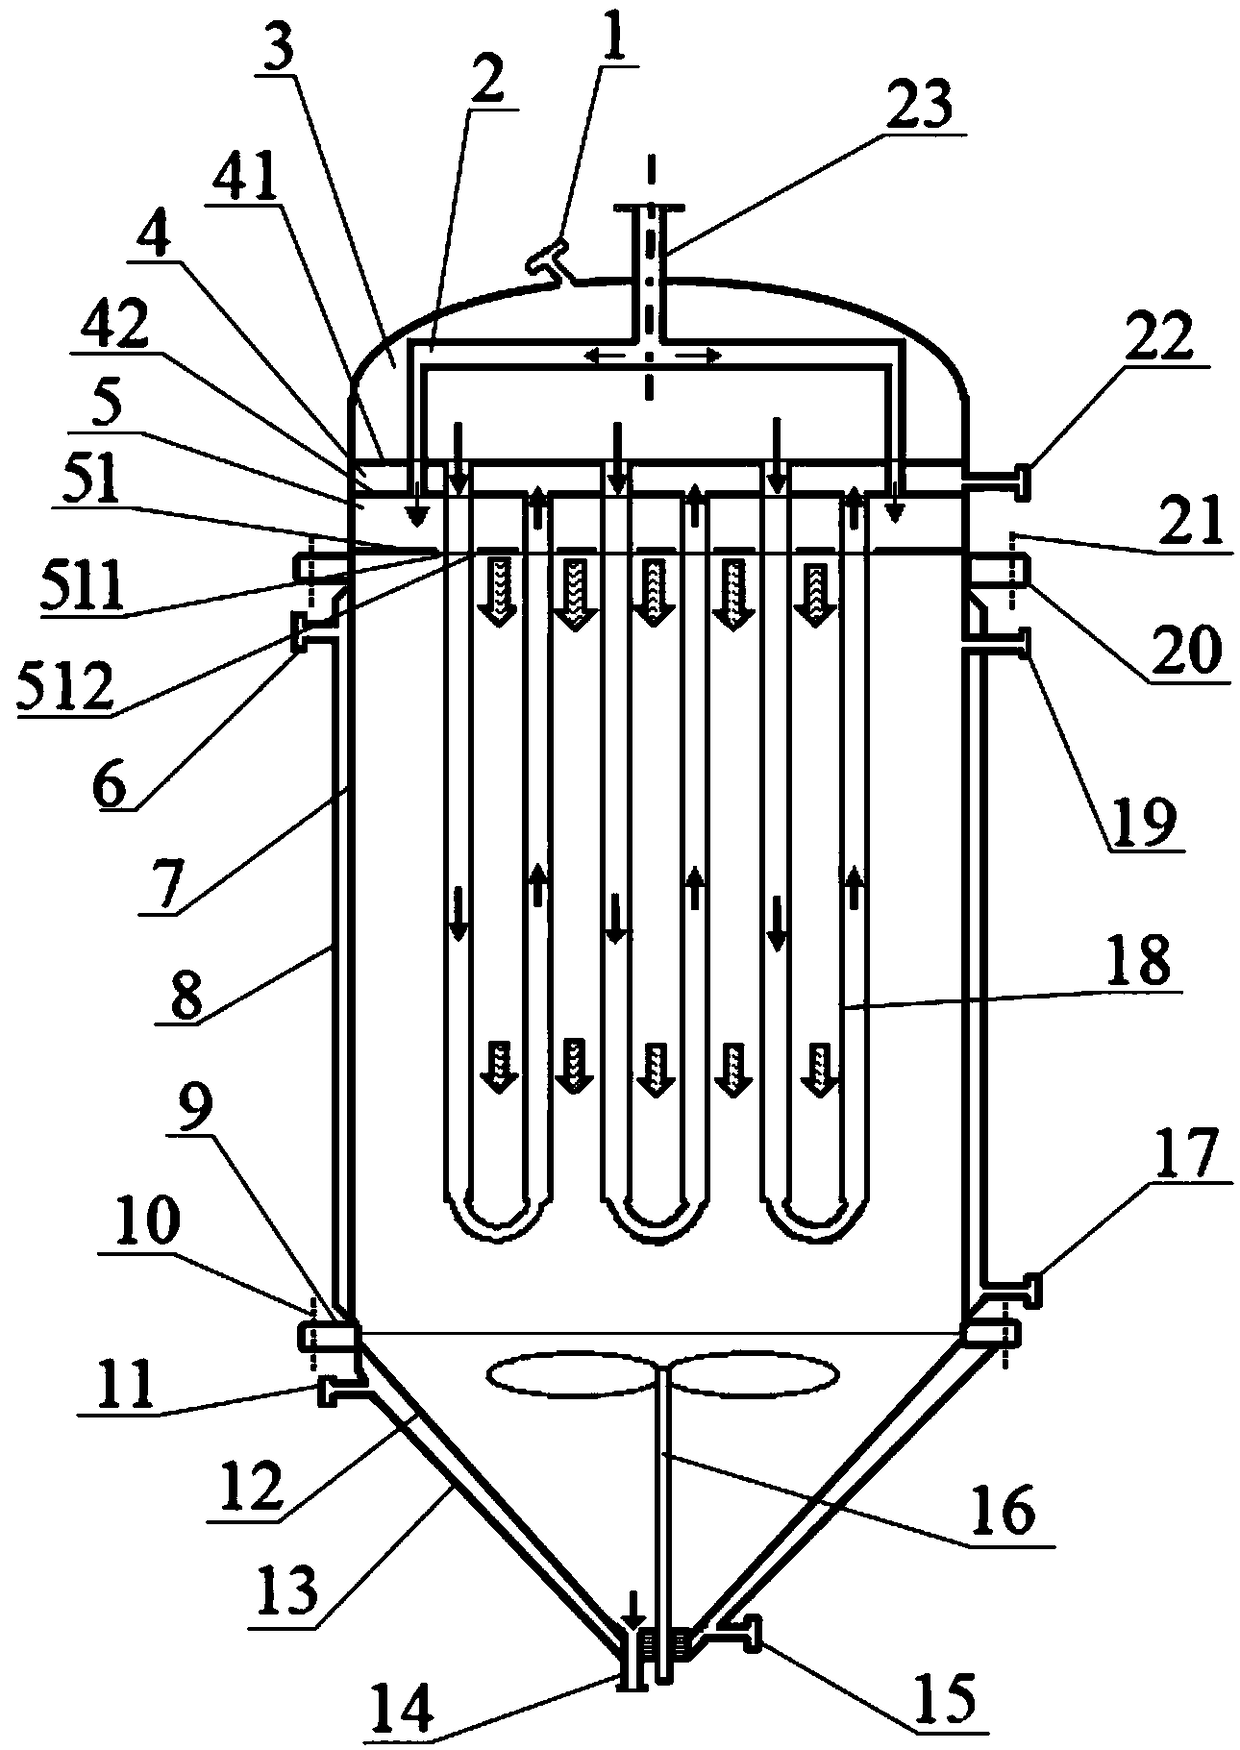 Falling film melt polycondensation reaction method and reactor between rows of tubes